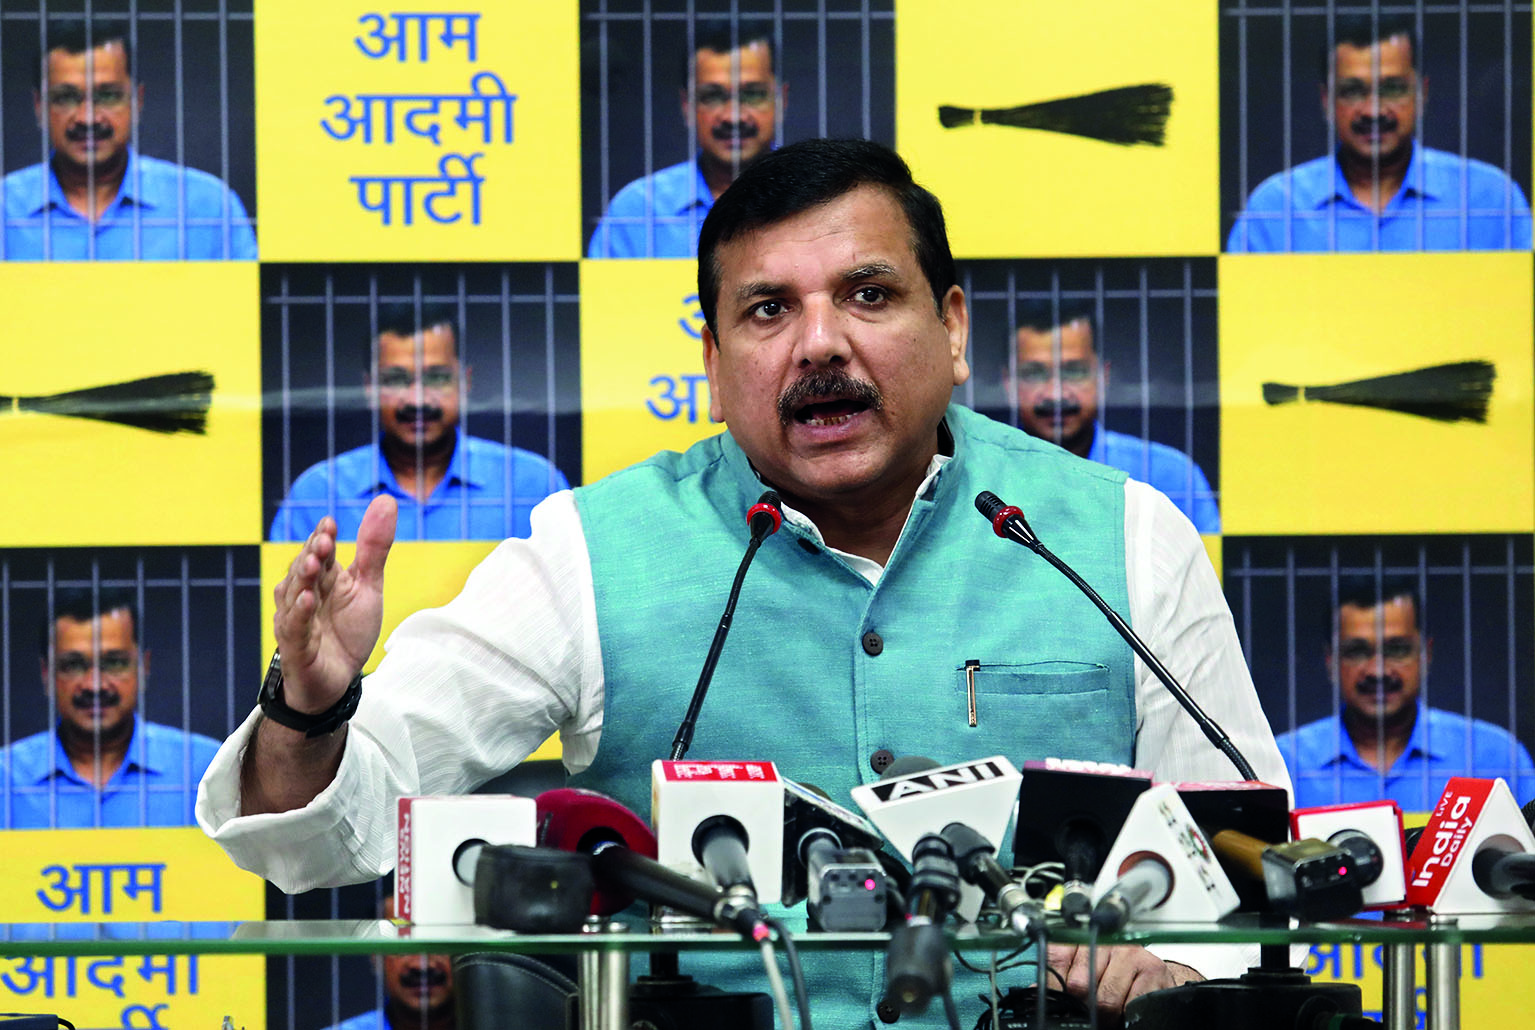 Why 3-time elected CM being treated inhumanely, asks AAP